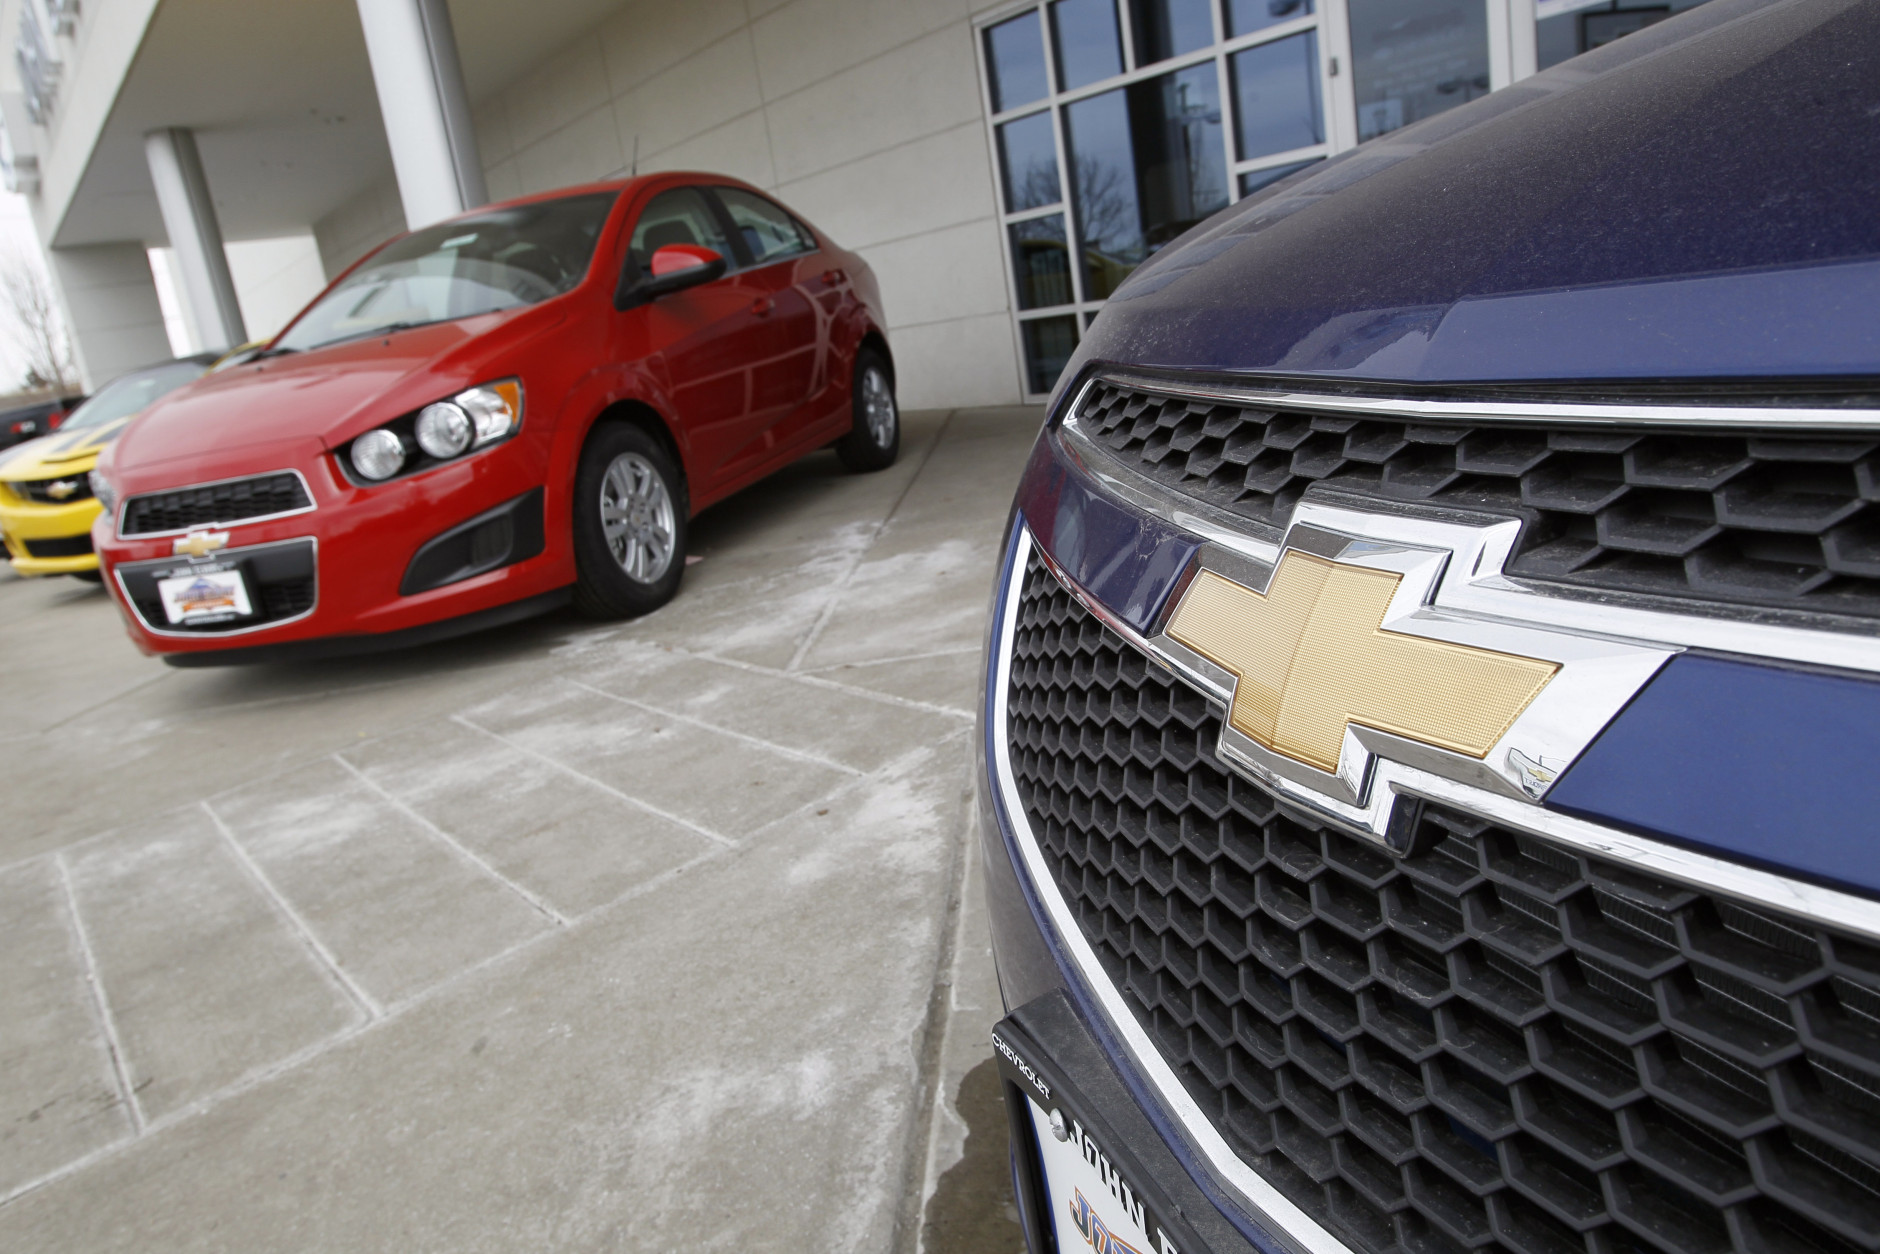 This Feb. 19, 2012 photo, shows the familiar Chevrolet bowtie logo displayed on the grille of a 2012 Cruze sedan (foreground) with a 2012 Sonic sedan in the background at a Chevrolet dealership in the south Denver suburb of Englewood, Colo. (AP Photo/David Zalubowski)